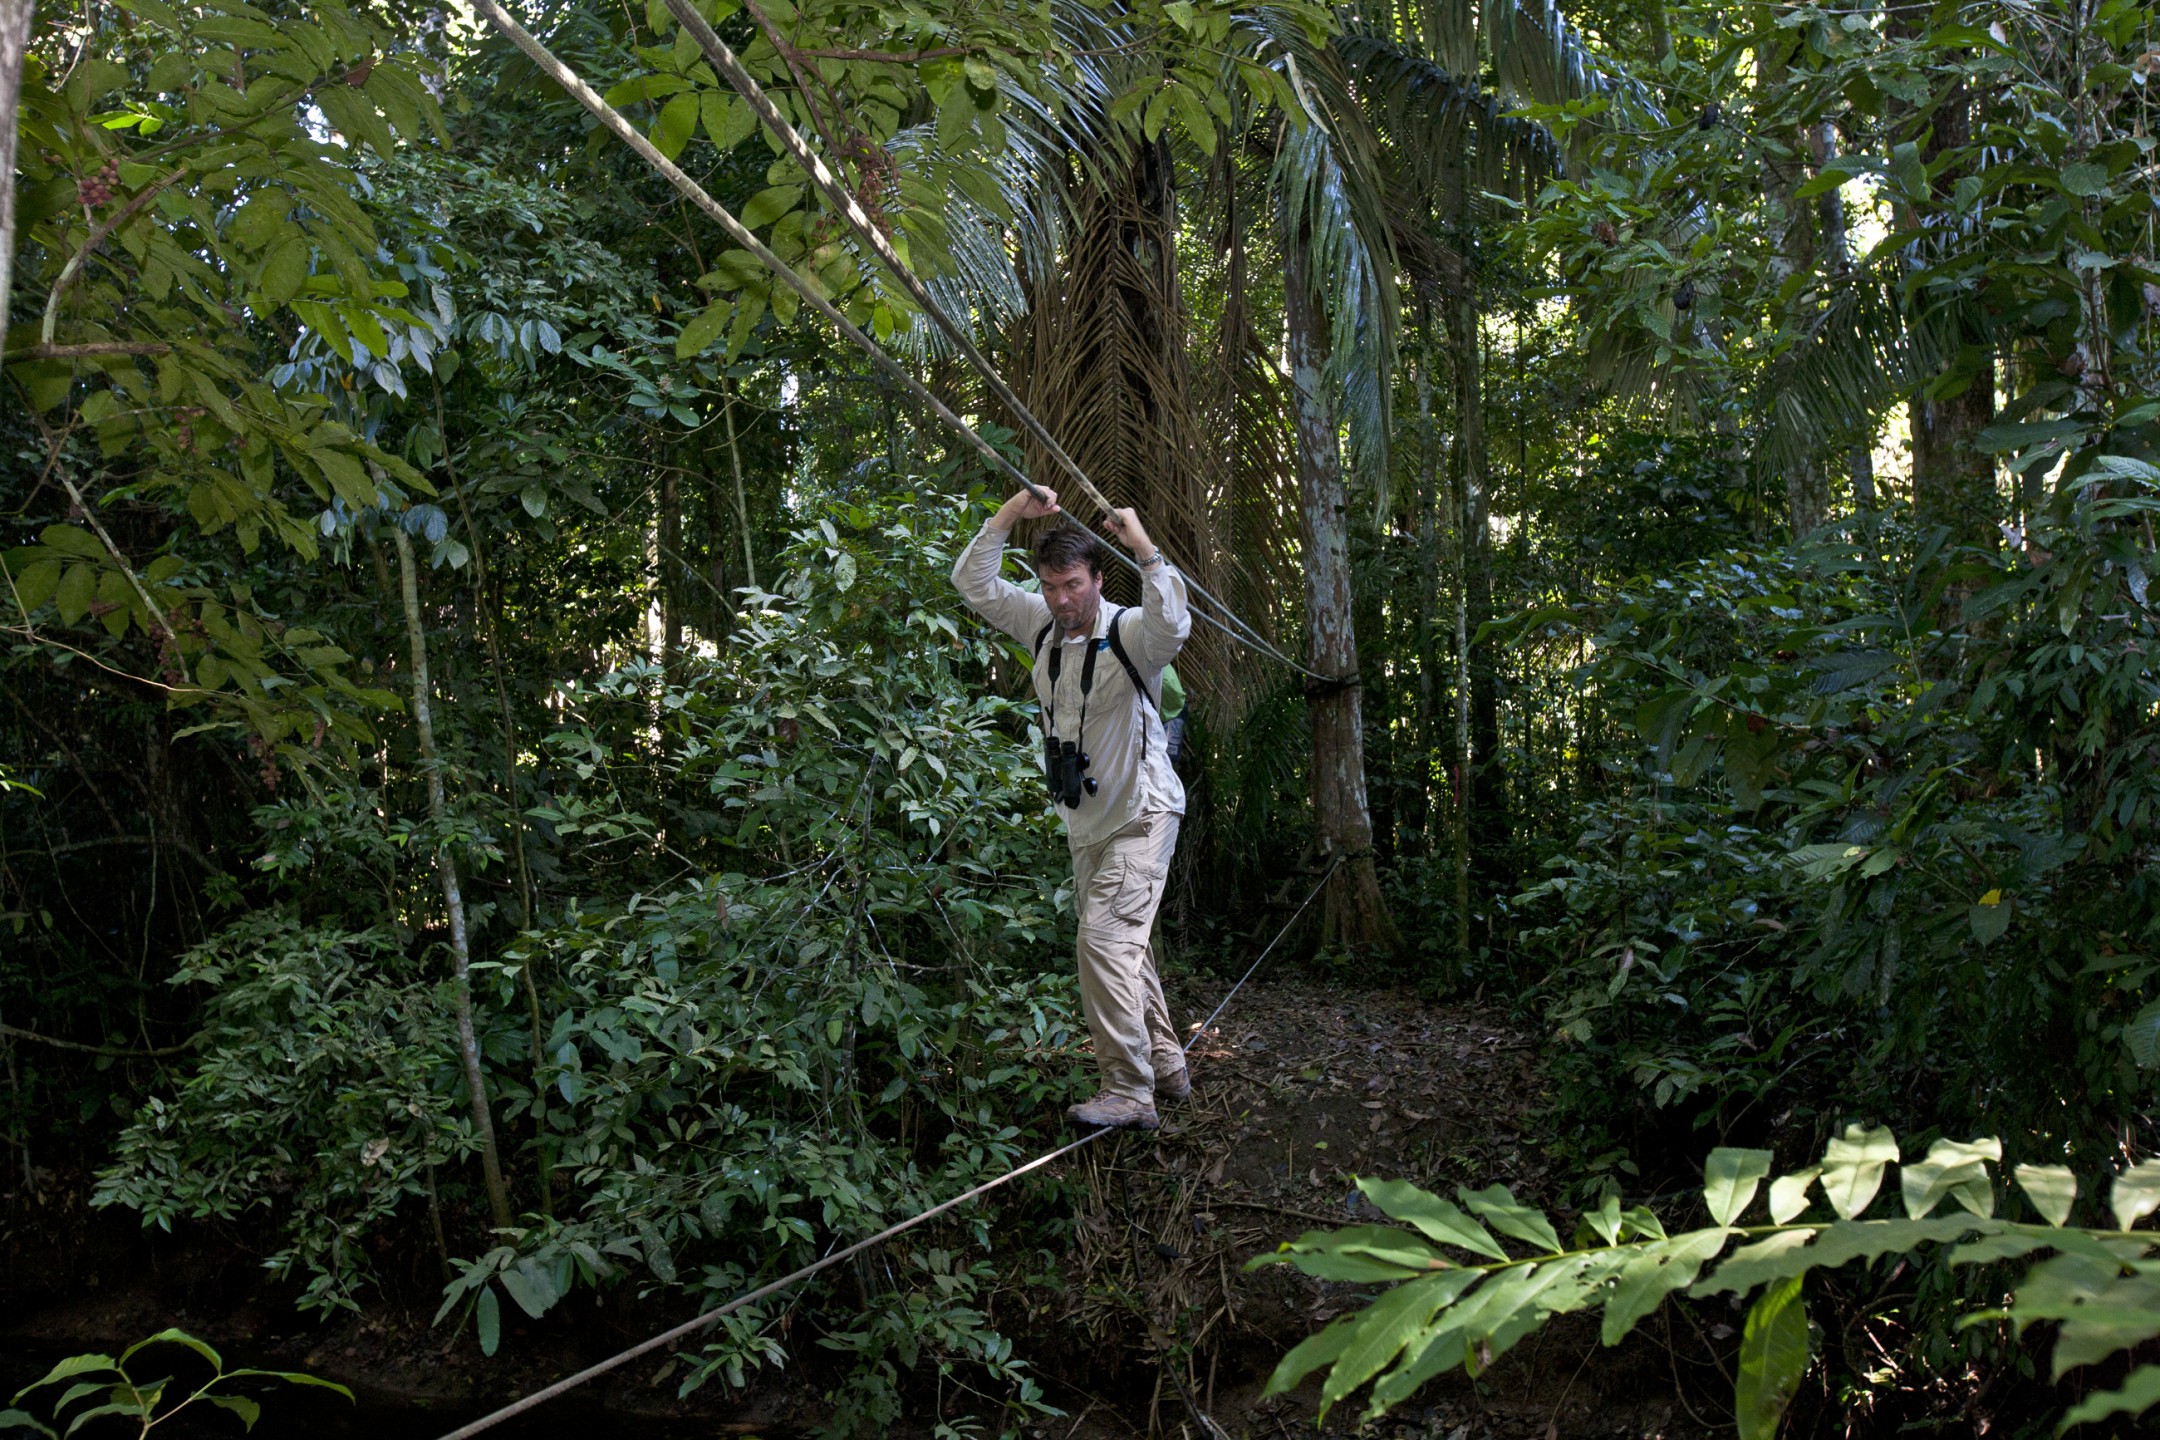 Dr. Ron Swaisgood, head of the Behavioral Ecology Division of the San Diego Institute for Conservation Research, makes his way along cables over a treacherous forest floor on his way back to the Cocha Cashu Biological Research Station. This nearly pristine habitat is ideal for studying the behavior of monkeys like titis and howlers—but it's very rugged for the human primates!